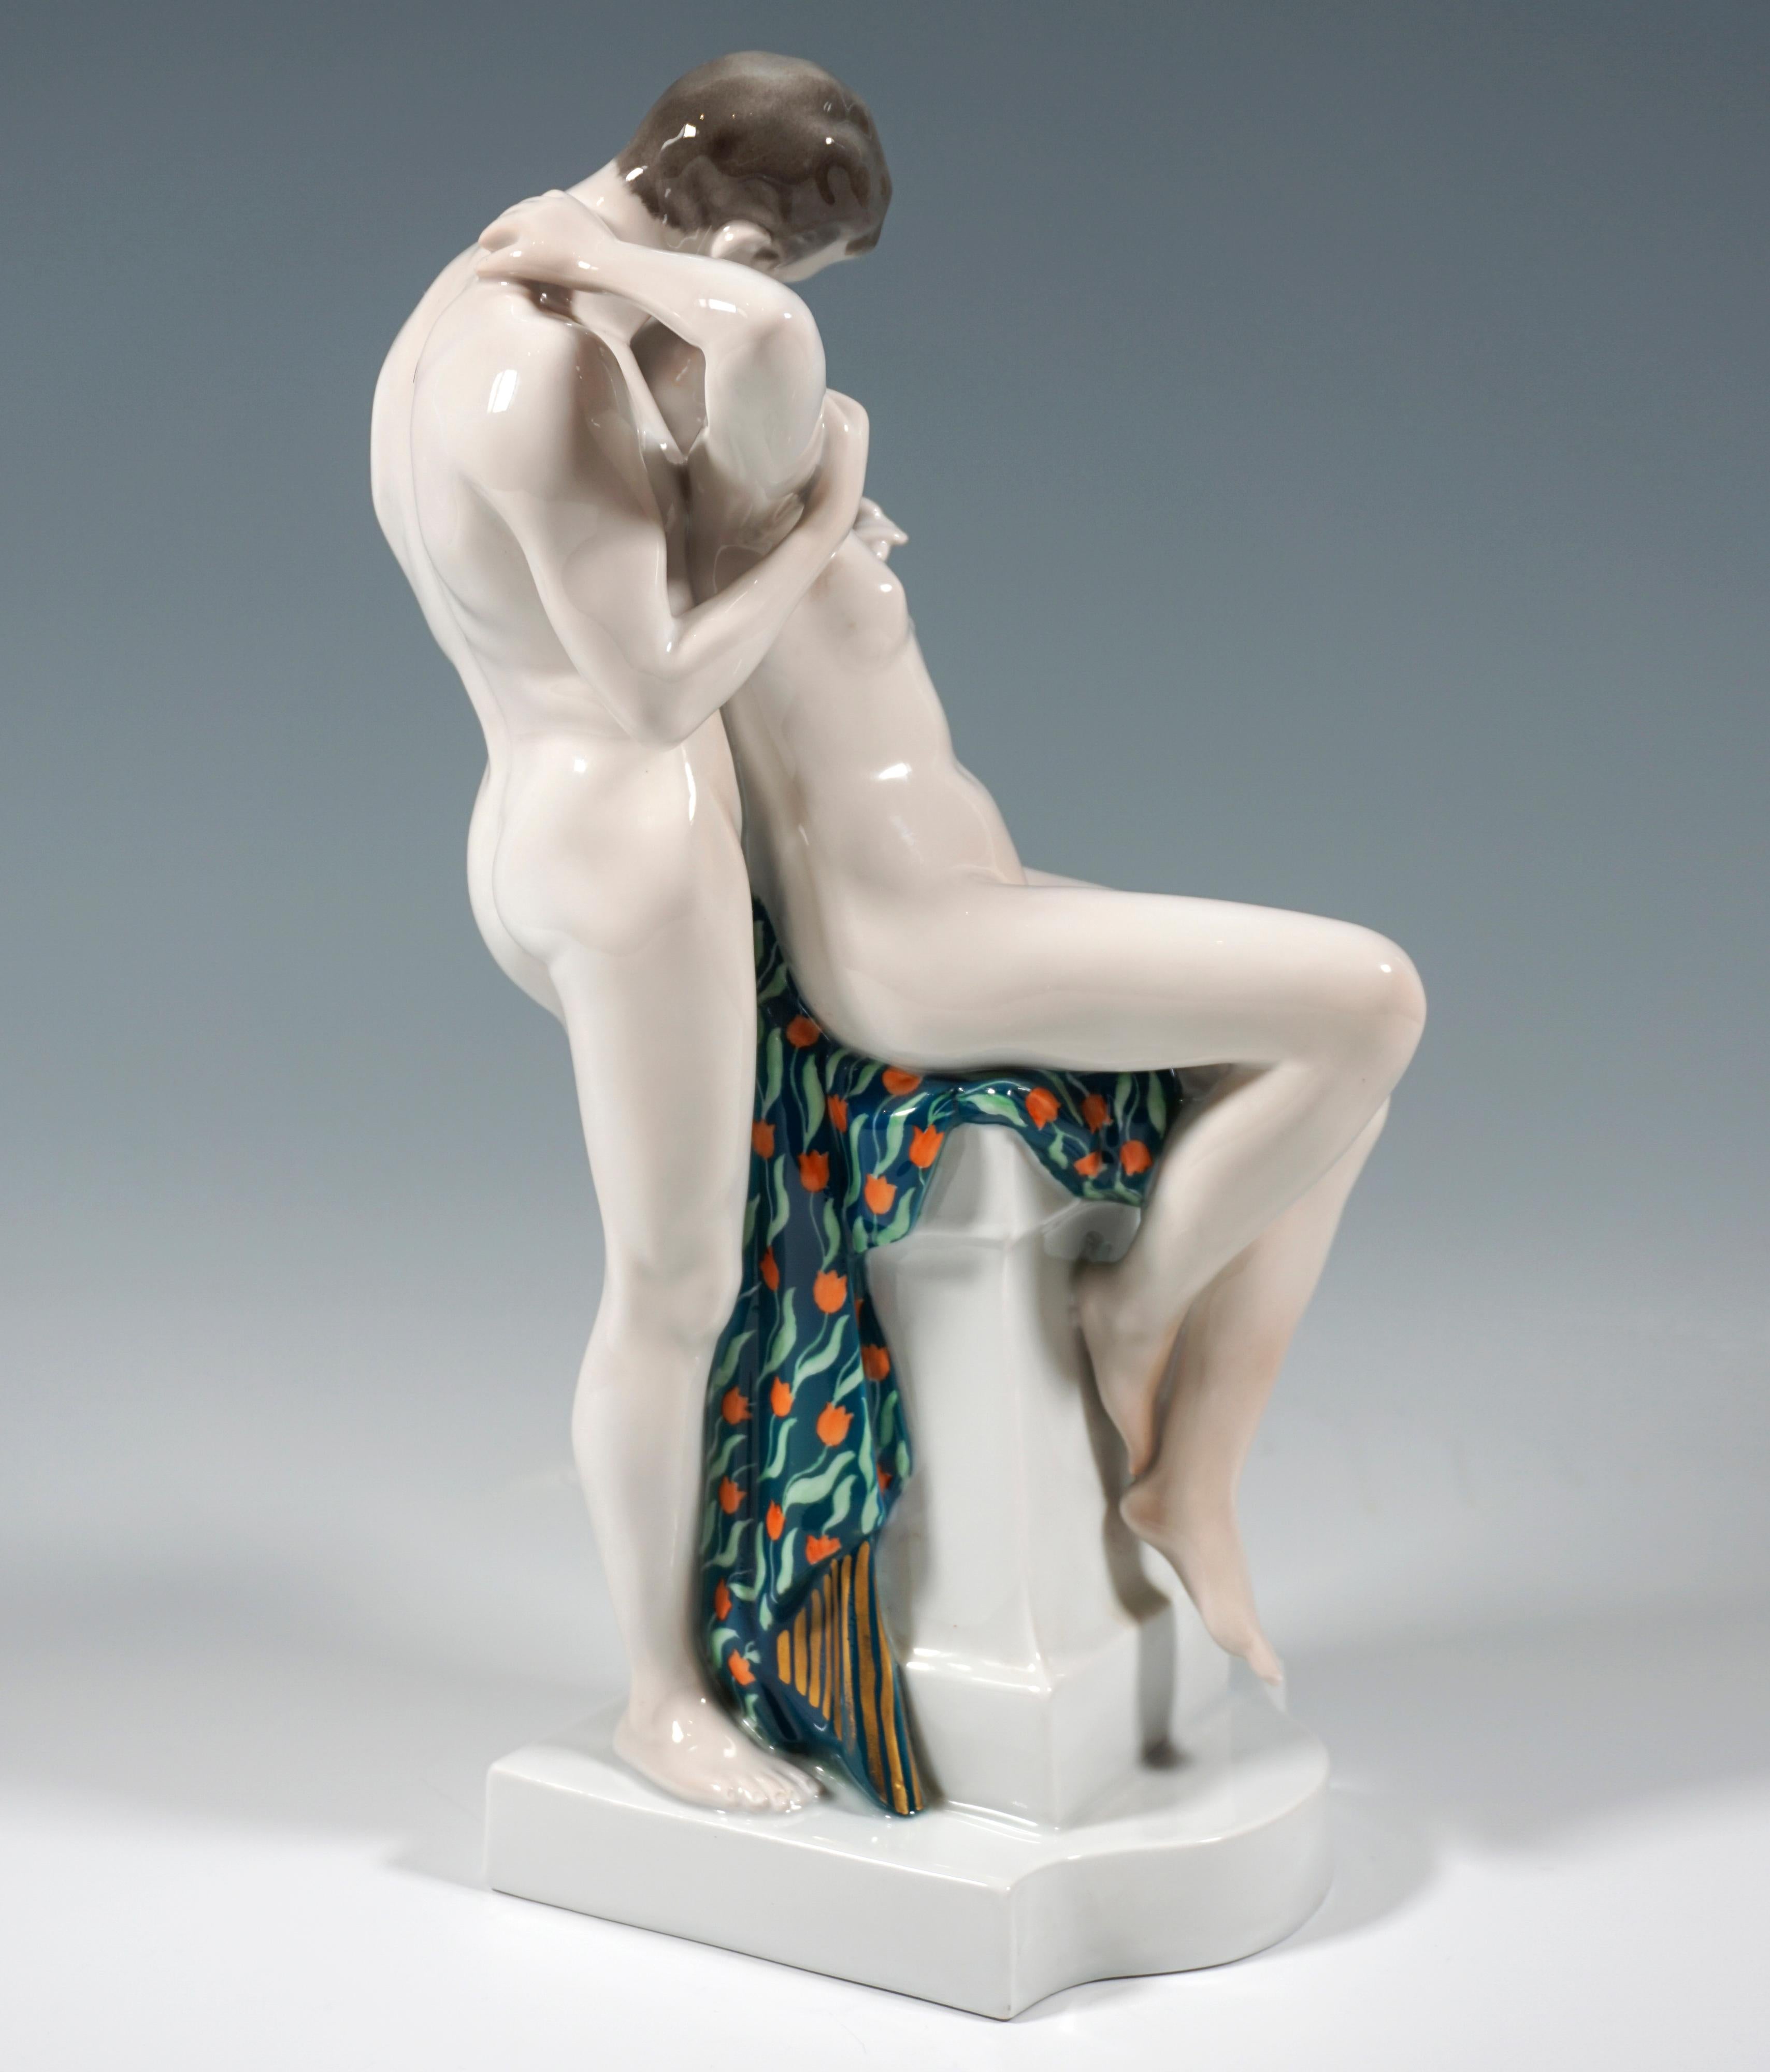 Excellent Large Art Nouveau Group:
Monumental depiction of a pair of lovers in intimate embrace: Unclothed young lady sitting on a pedestal and kissing the naked young man standing behind her. Sparingly painted, only the cloth on which the lady is